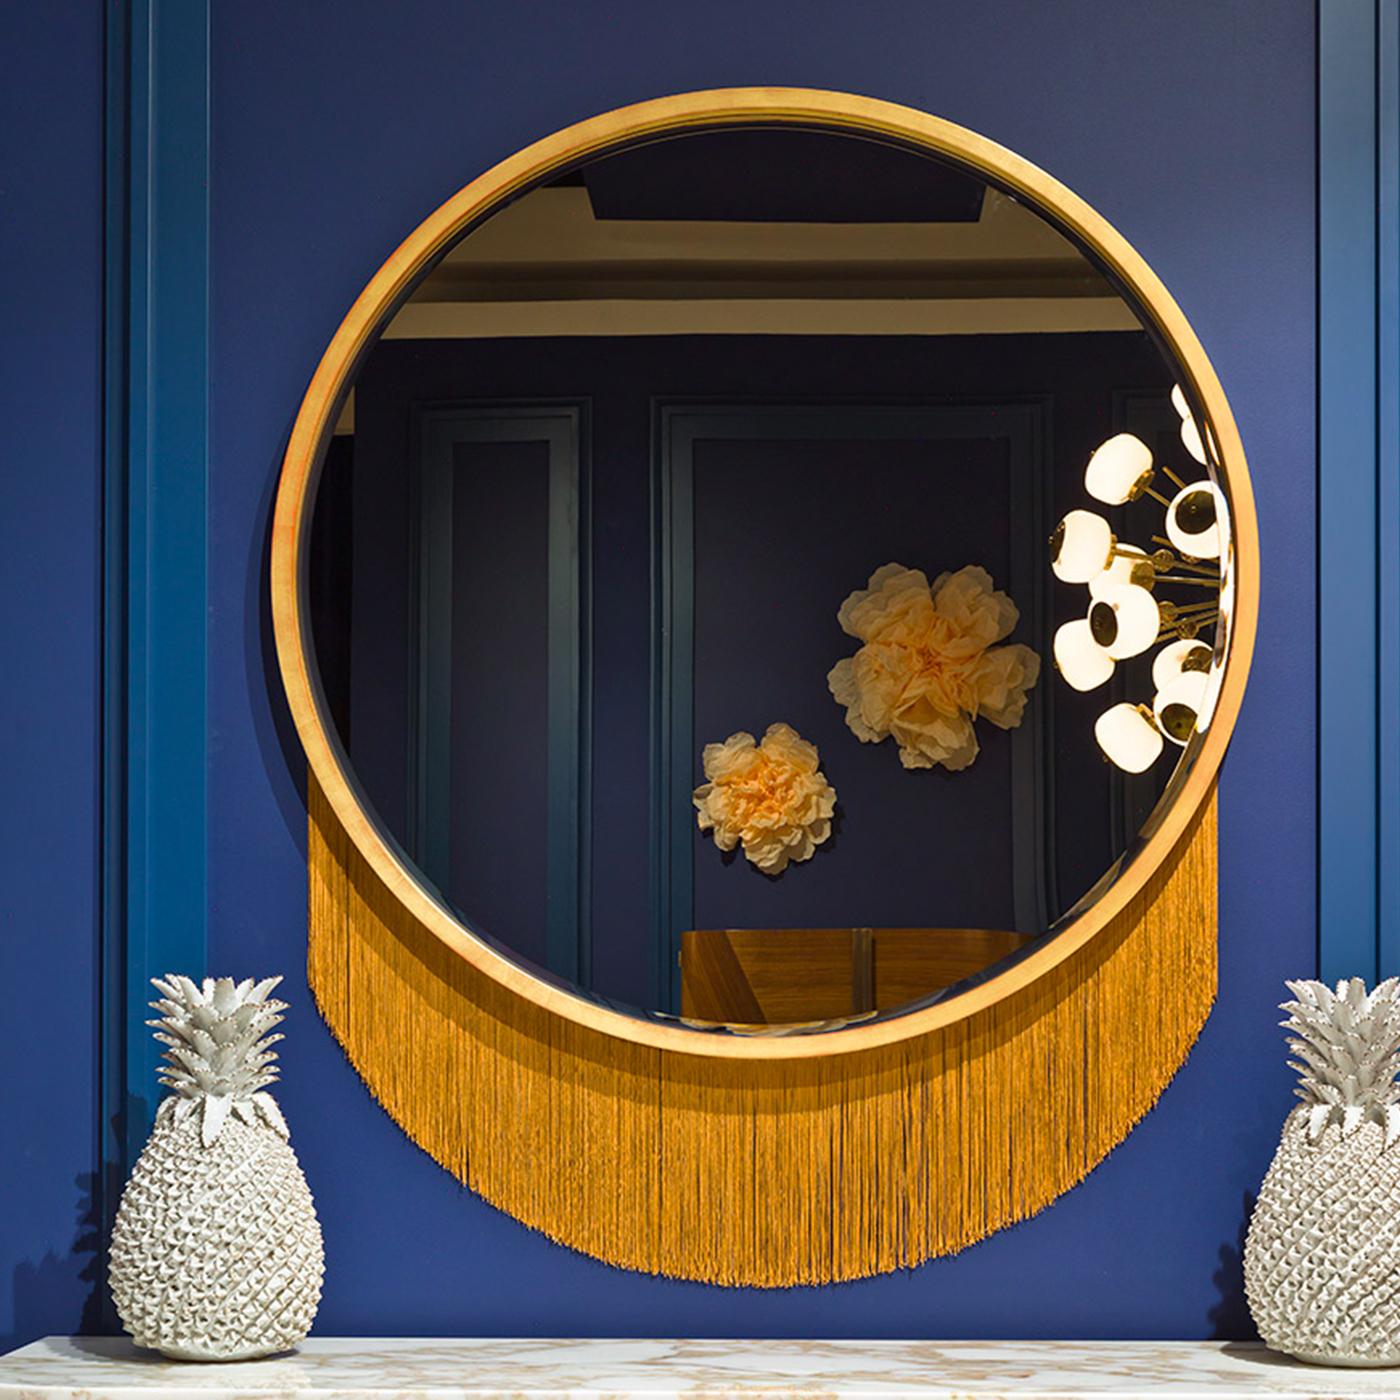 Brimming with minimalist appeal, this captivating wall mirror is a sophisticated way for brightening up any midcentury or minimalist interior with style. The mirror's prominent circular silhouette is fashioned of wood with a gold-leaf finish, which